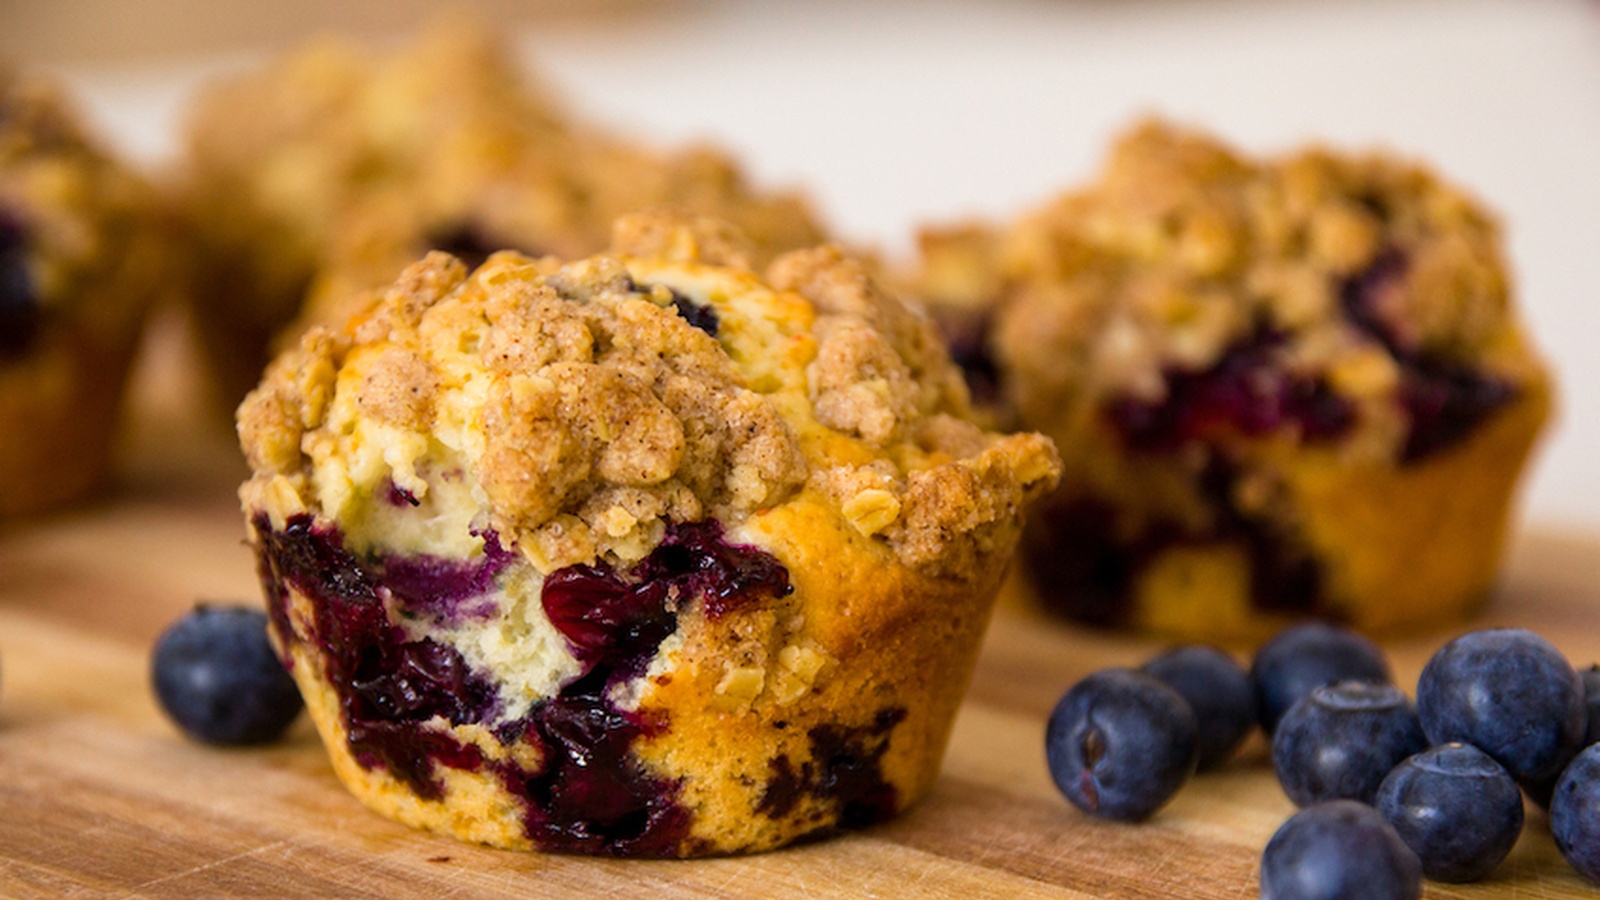 8 Food Matters Approved Gluten-Free Muffin Recipes (Sweet & Savory)